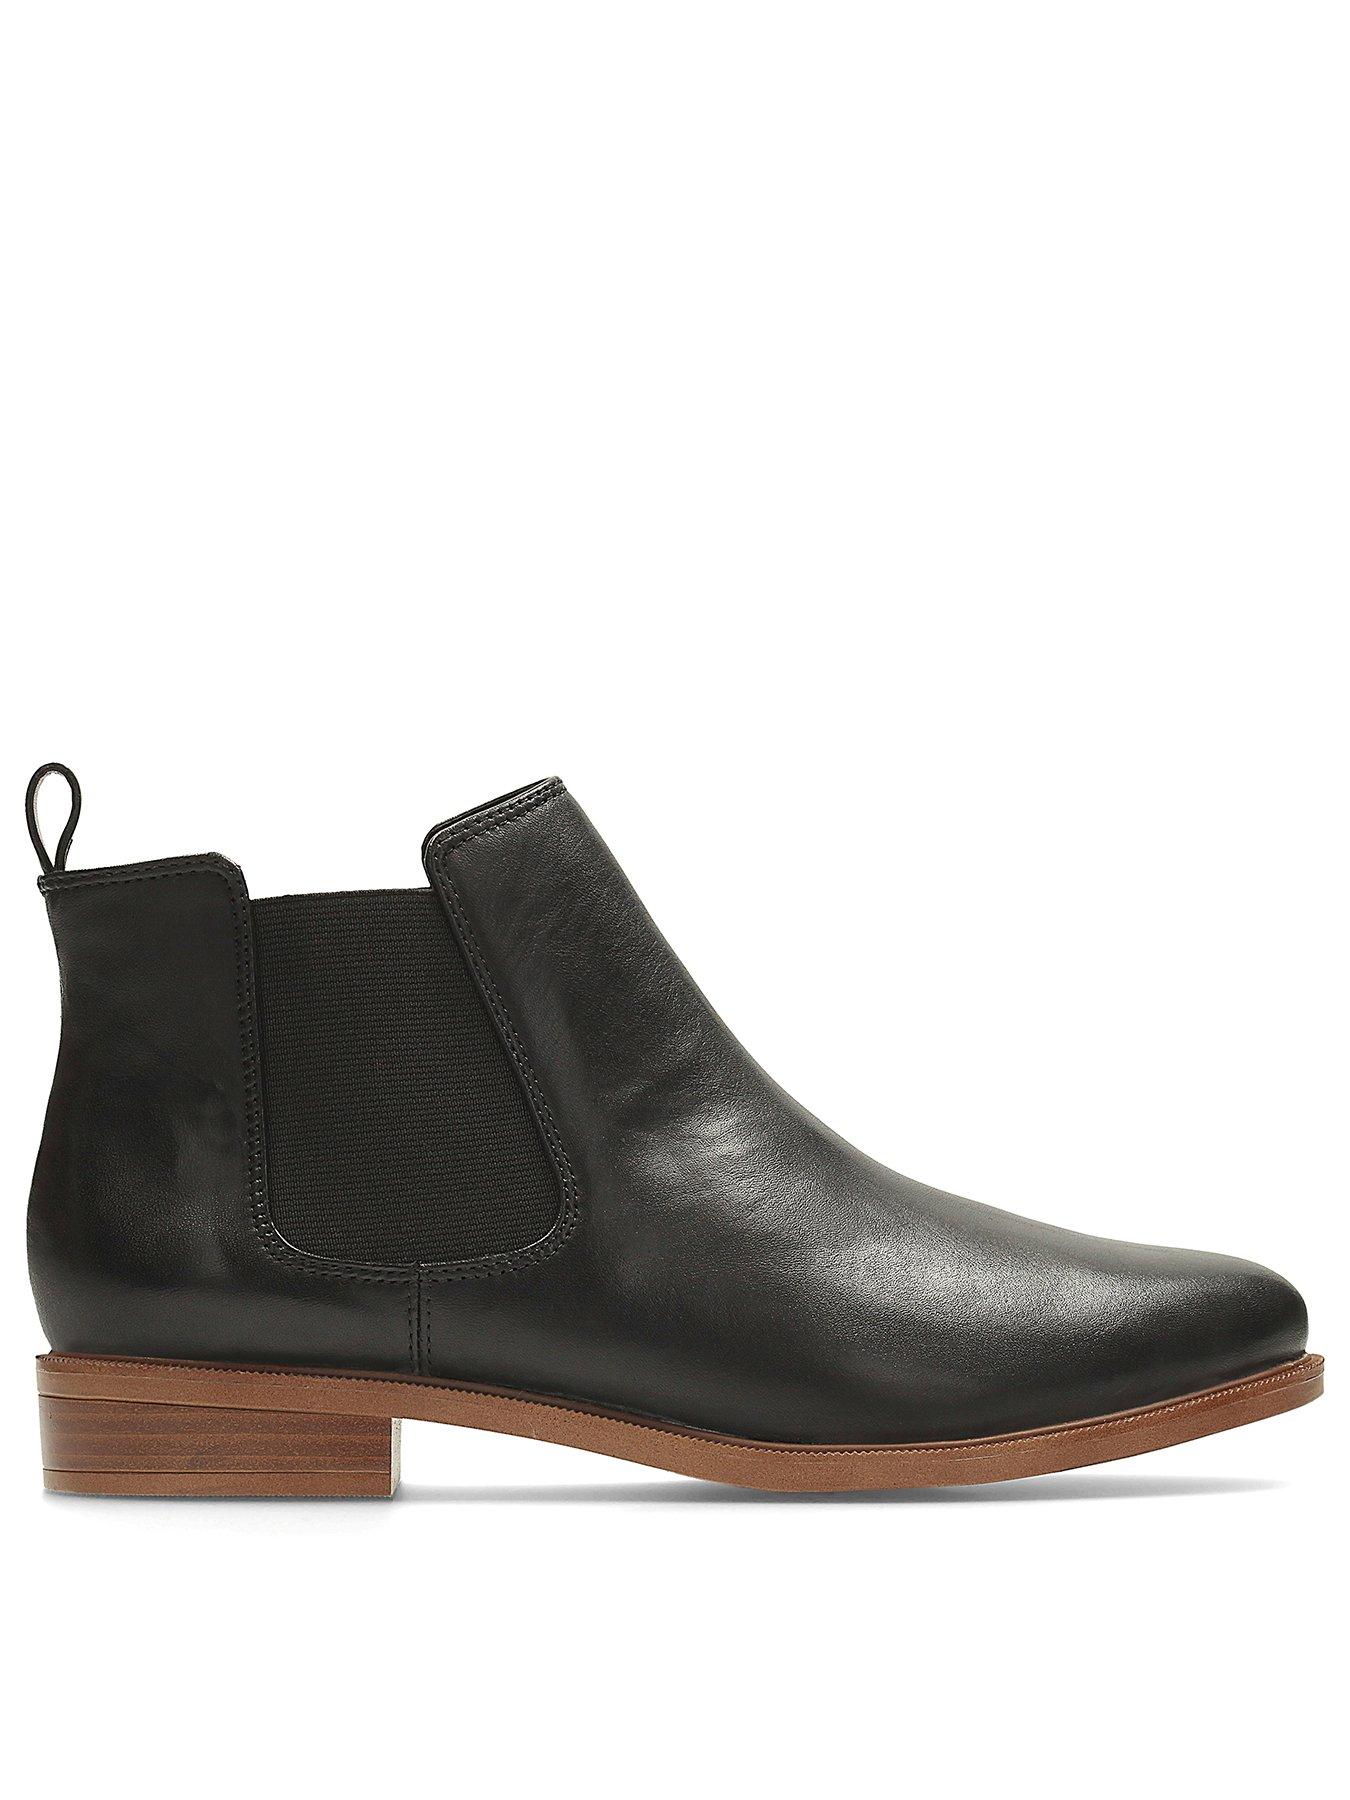 Clarks Taylor Shine Wide Fit Leather Ankle | very.co.uk